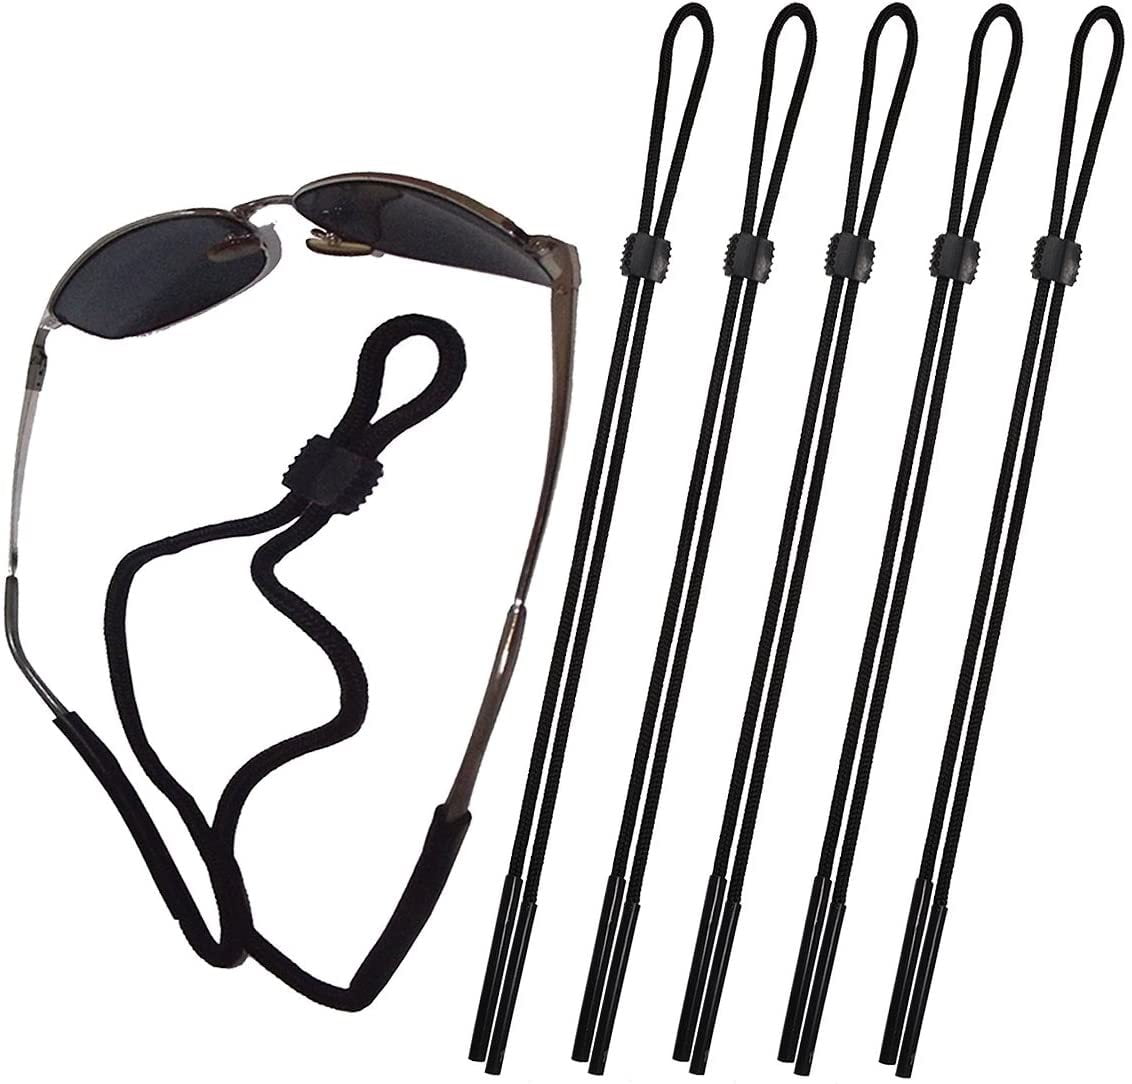 Adjustable Sunglass Strap Chums Eye Glasses String Holder Lanyards Eyewear Retainer for Sports and Outdoor Activities 12 Pack Glasses Strap 